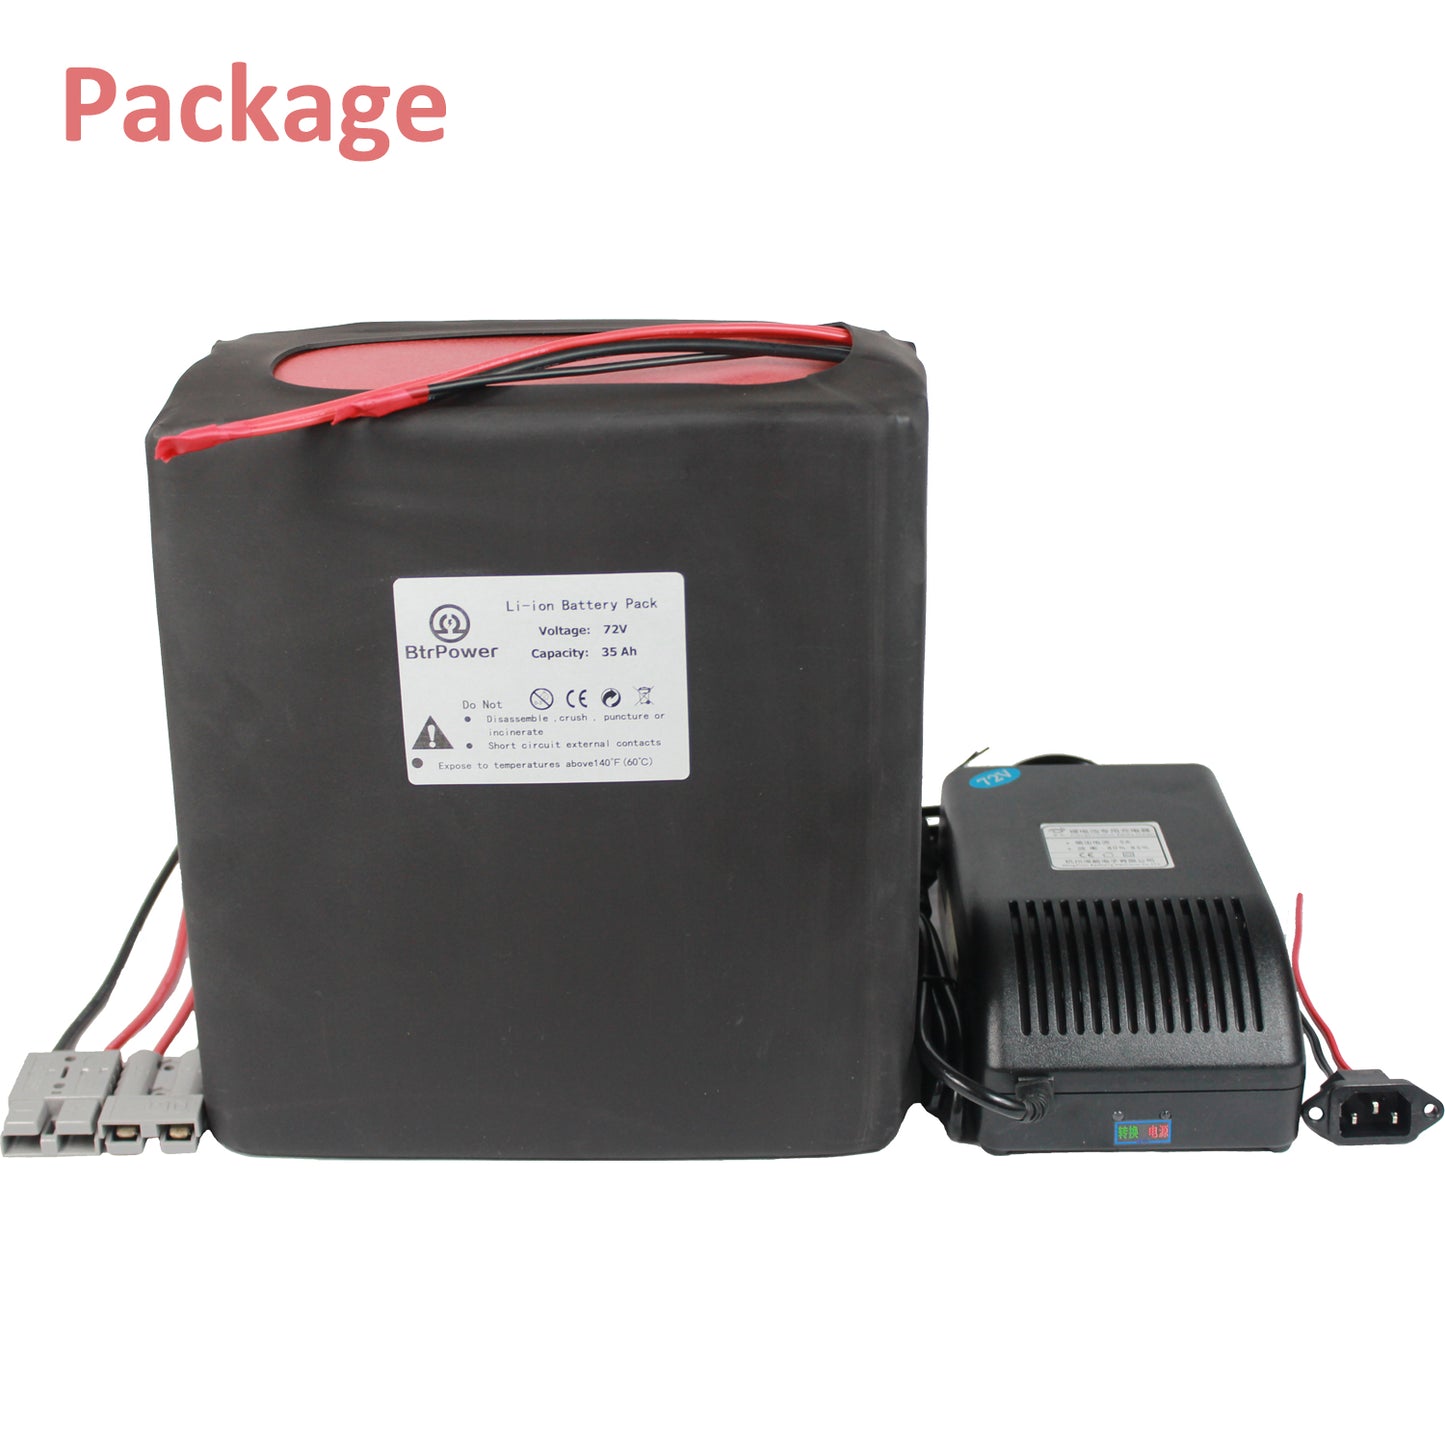 BtrPower Ebike Battery 72V 35AH Lithium ion Battery Pack with 50A BMS,5A Charger